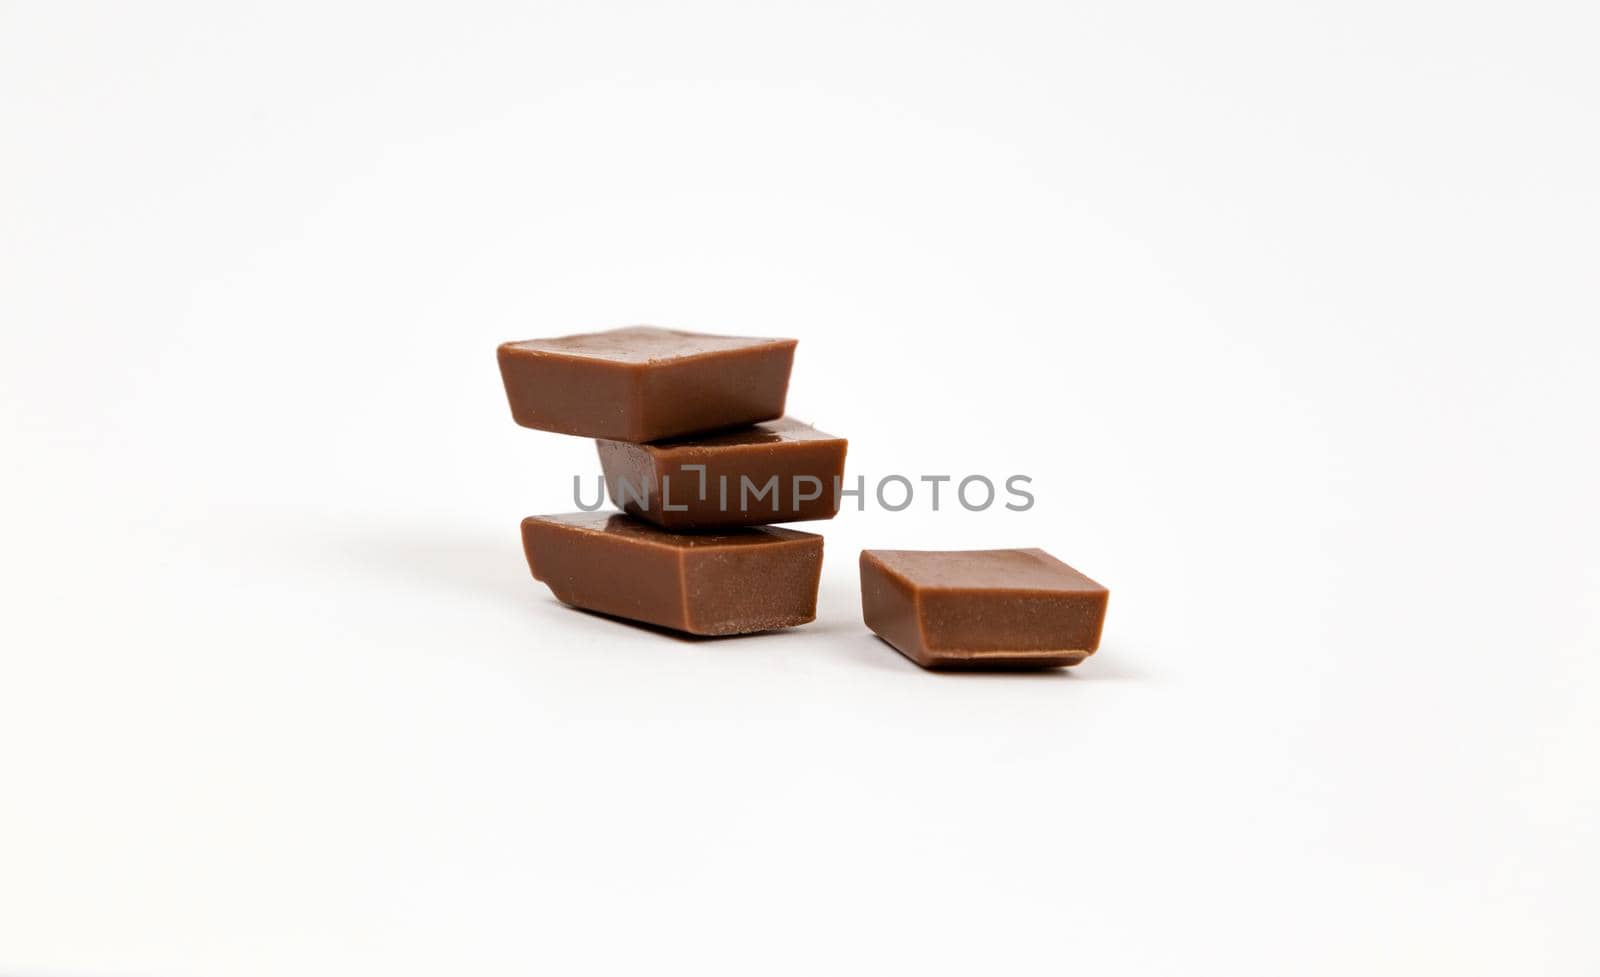 Macro photo of Chocolate bar. Broken pieces over white background.